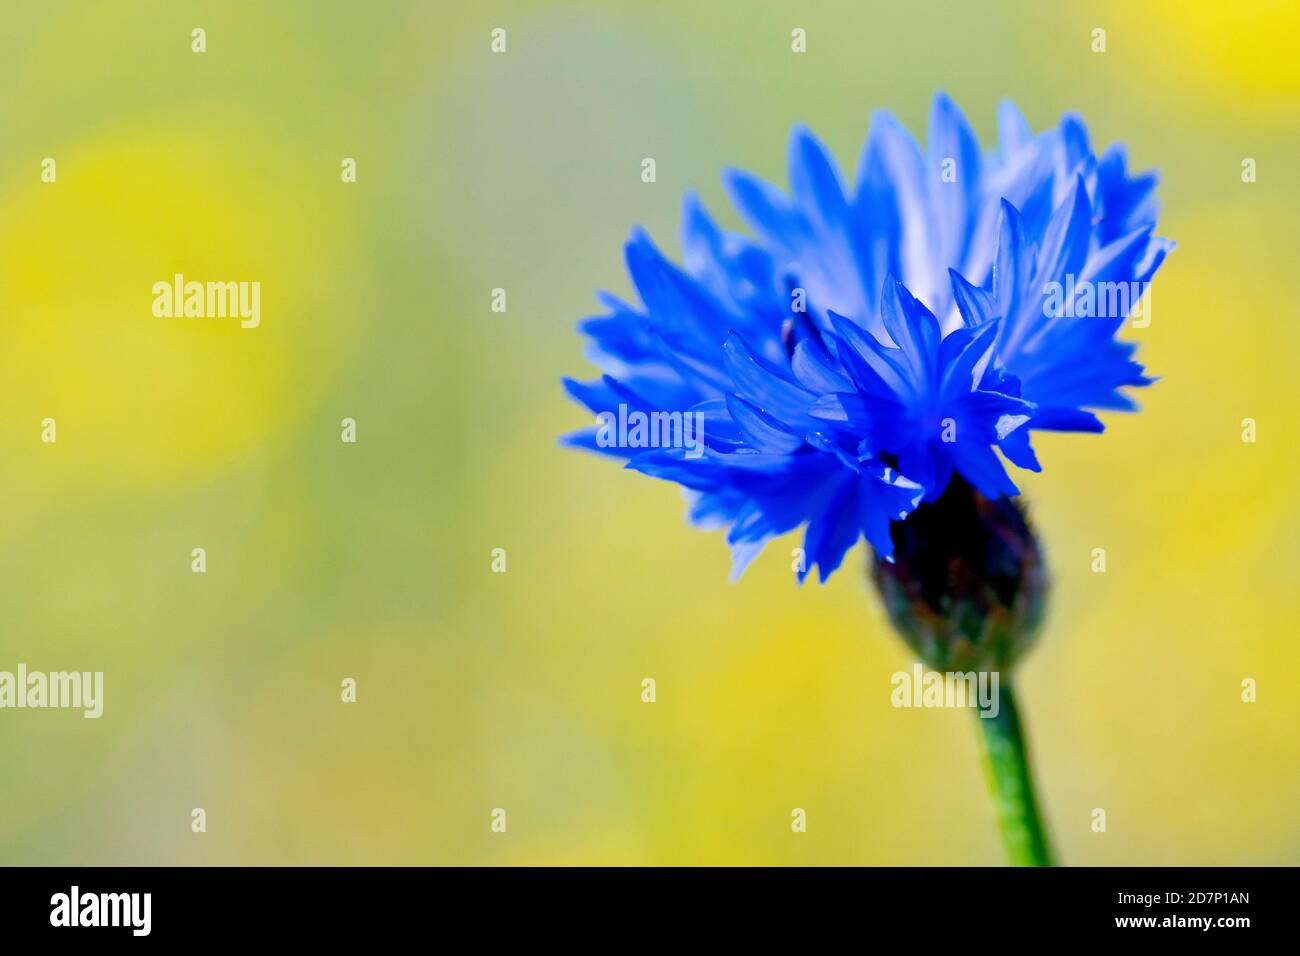 Cornflower (centaurea cyanus), also known as Bluebottle, close up of a solitary flower, isolated against an out of focus background. Stock Photo